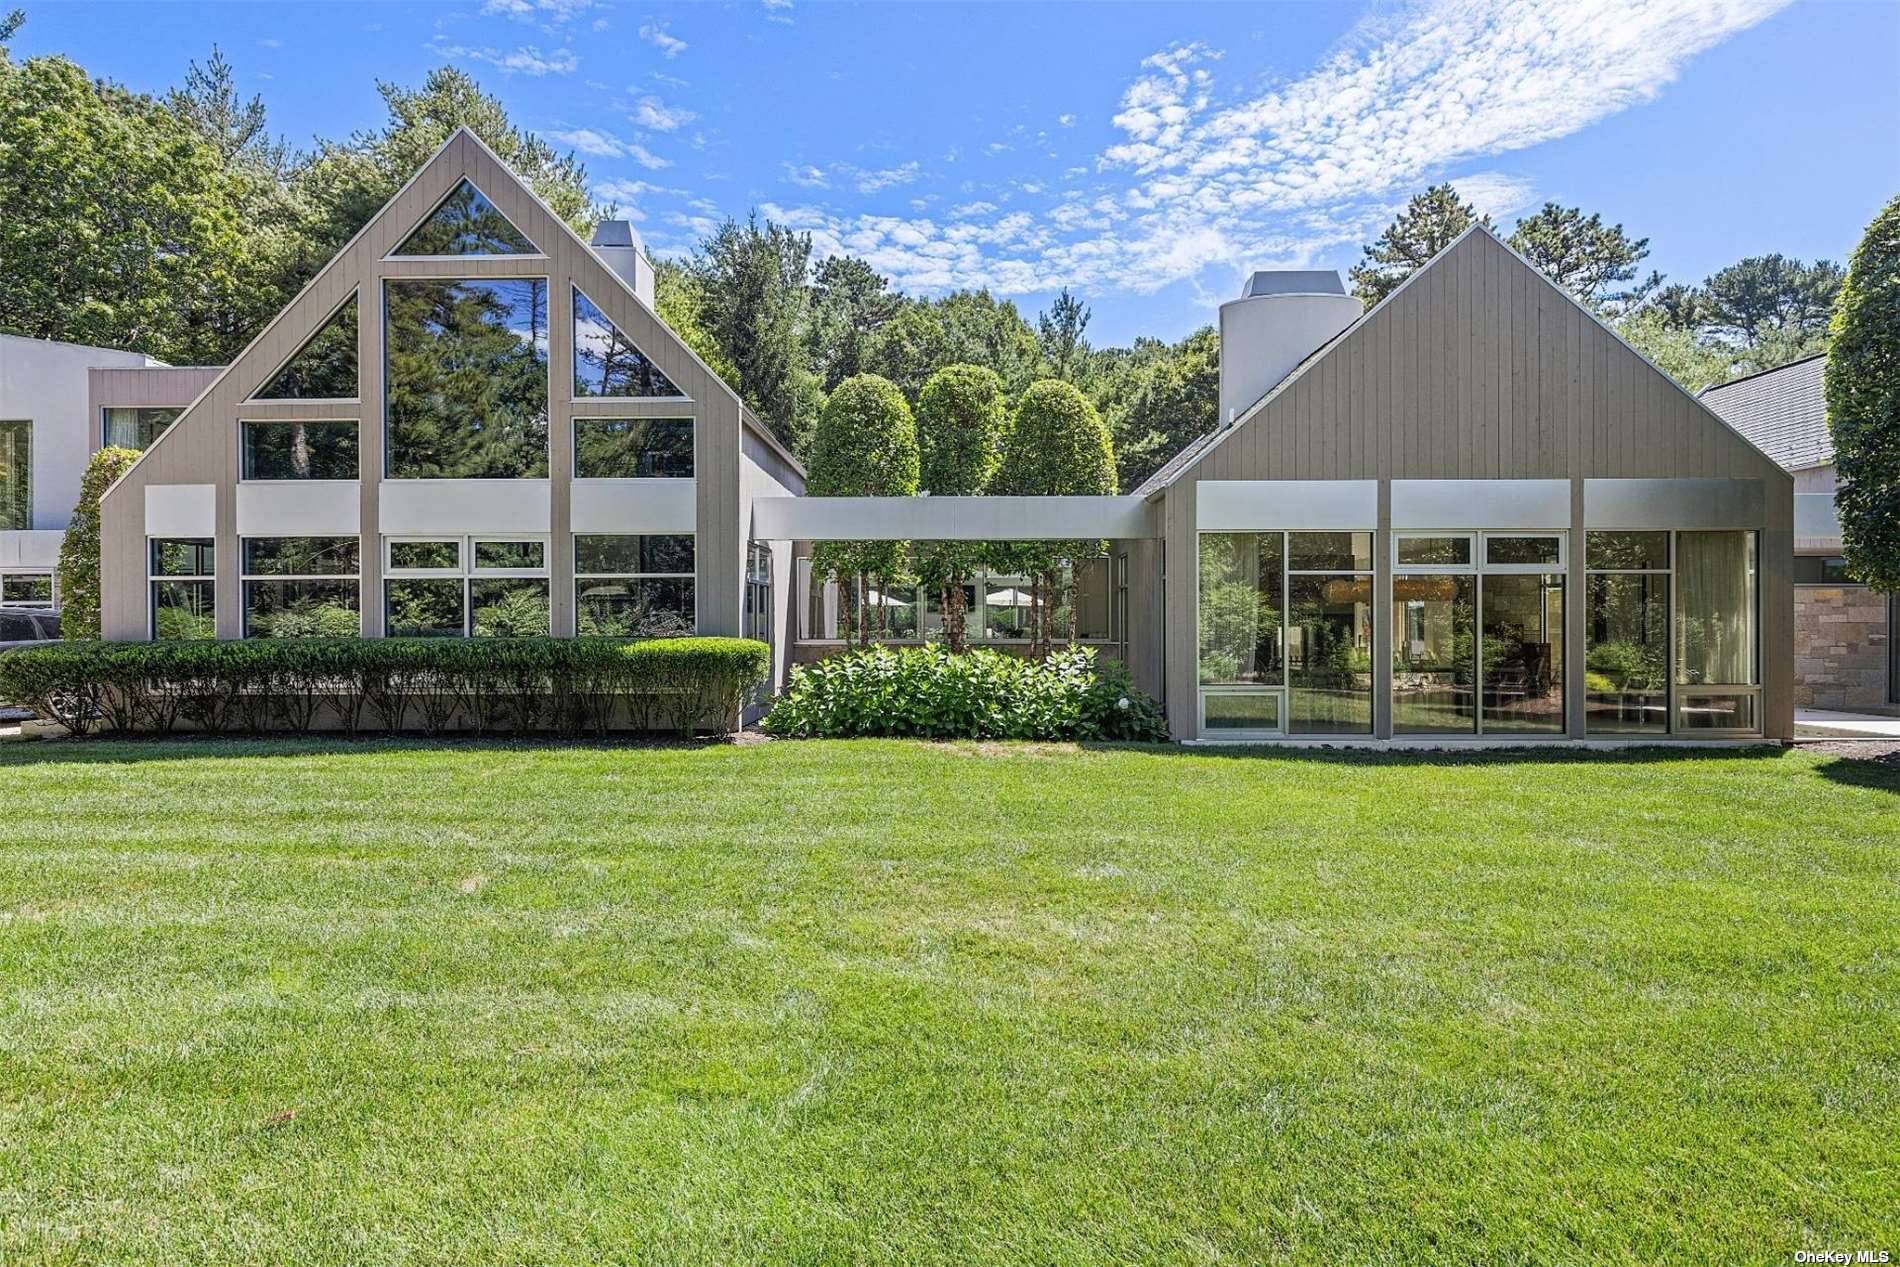 Rental Reg. 22 1, 364. This world class retreat by renowned architect Bruce Nagel is an entertainers dream home.